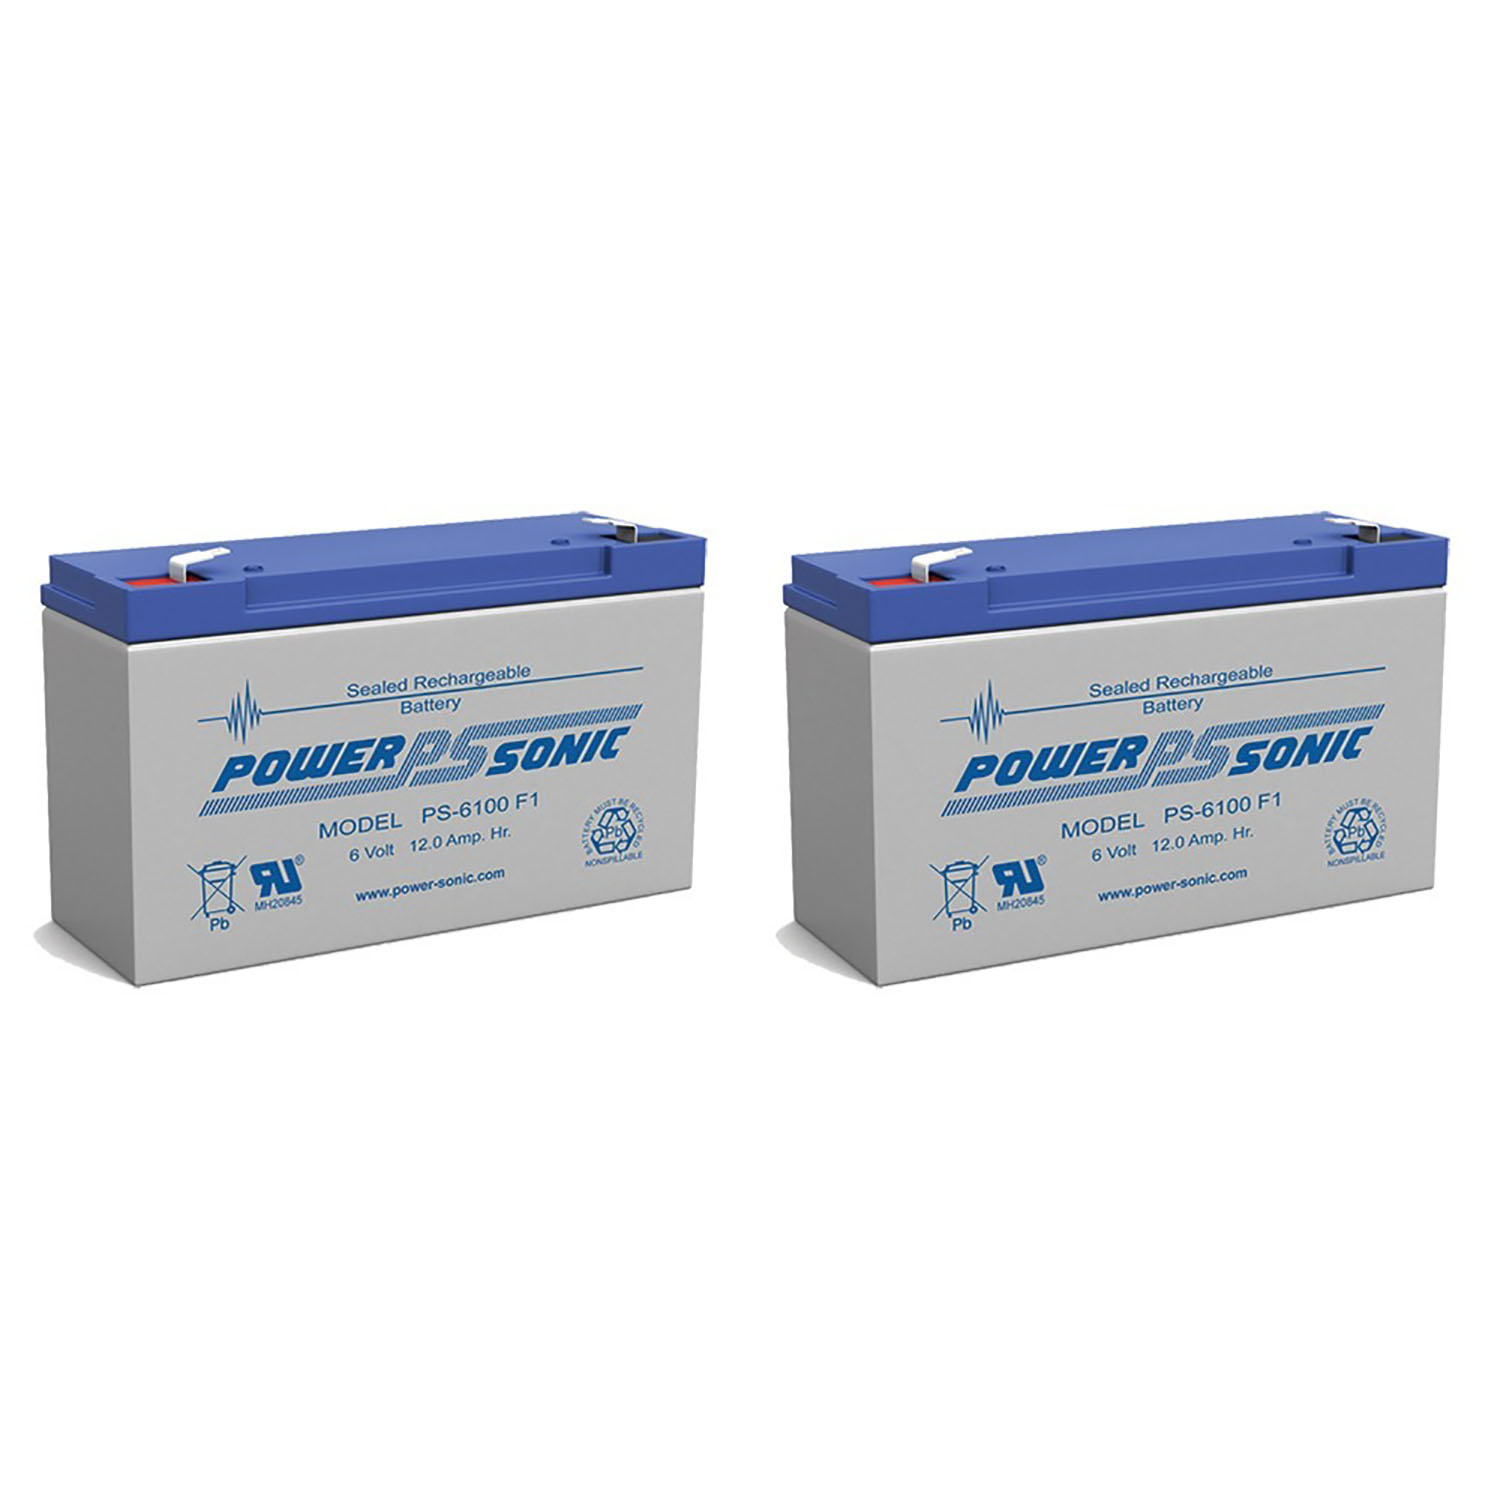 PS-6100 6V 12AH Replacement Battery for APC Smart UPS 800RT - 2 Pack